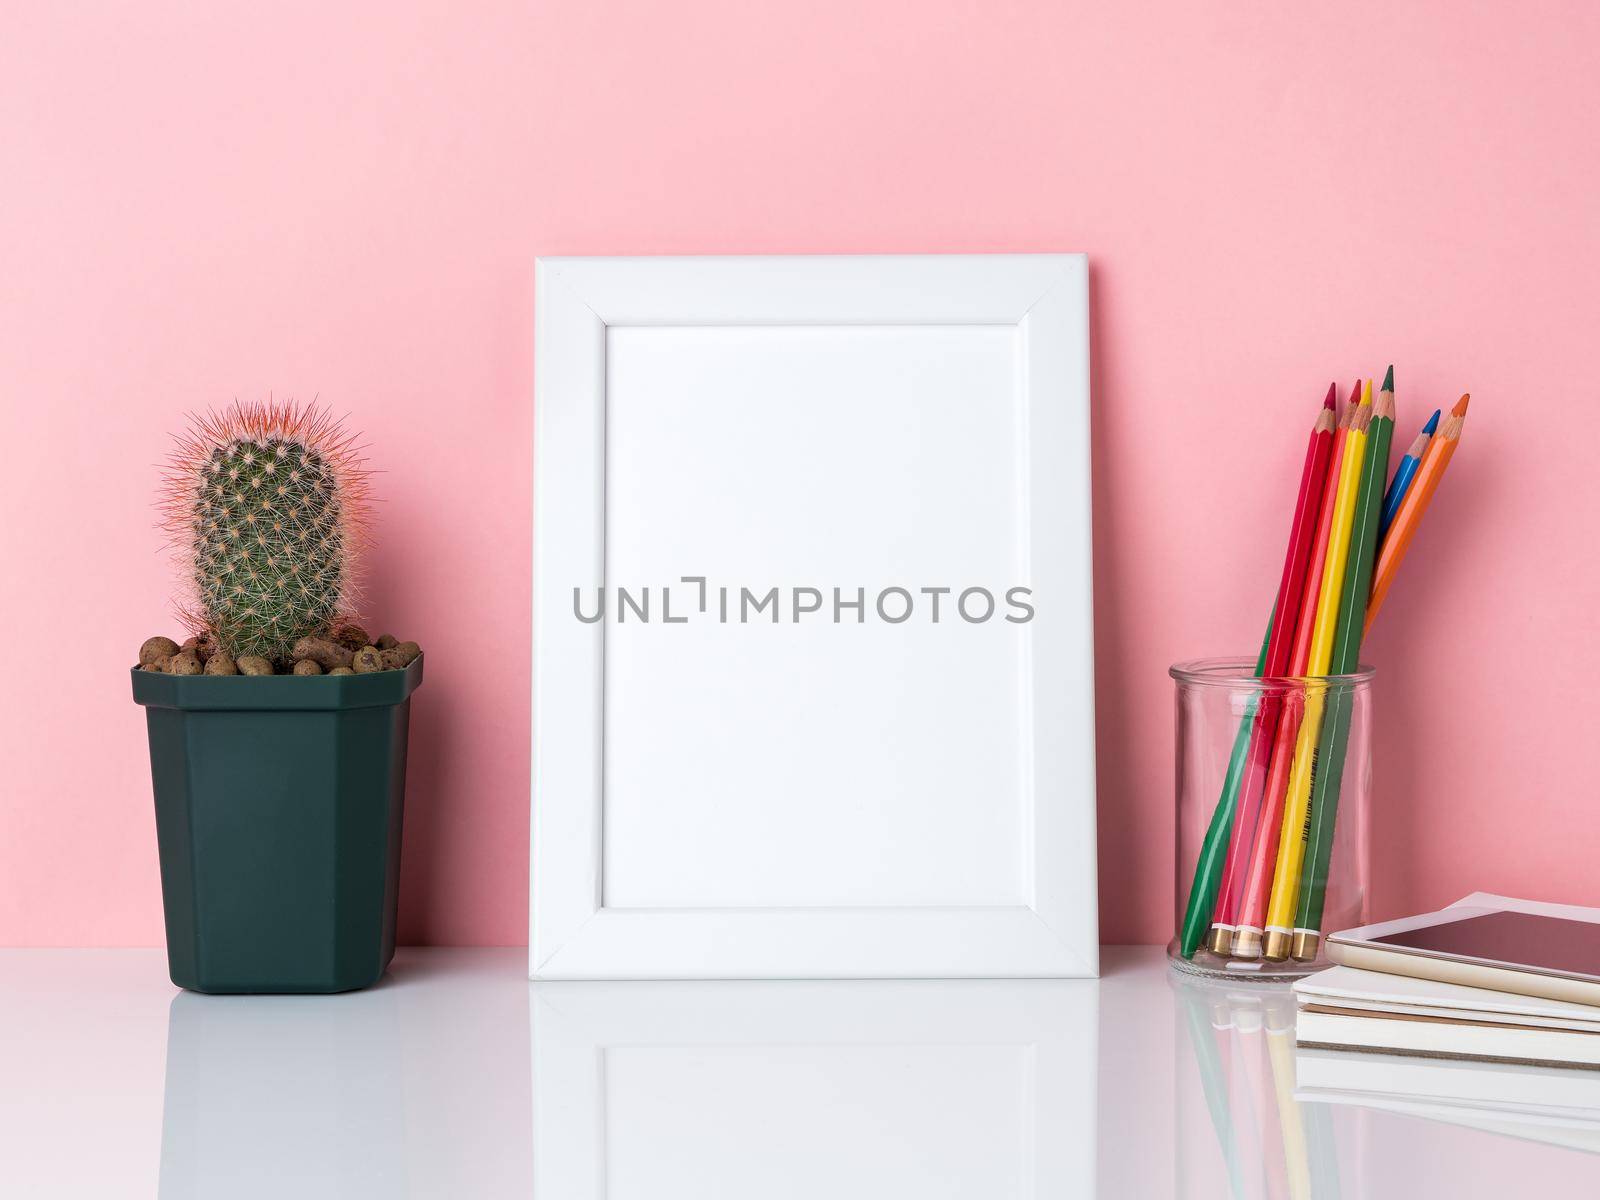 Blank white frame, crayon in jar, plant cactus on a white table against the pink wall with copy space